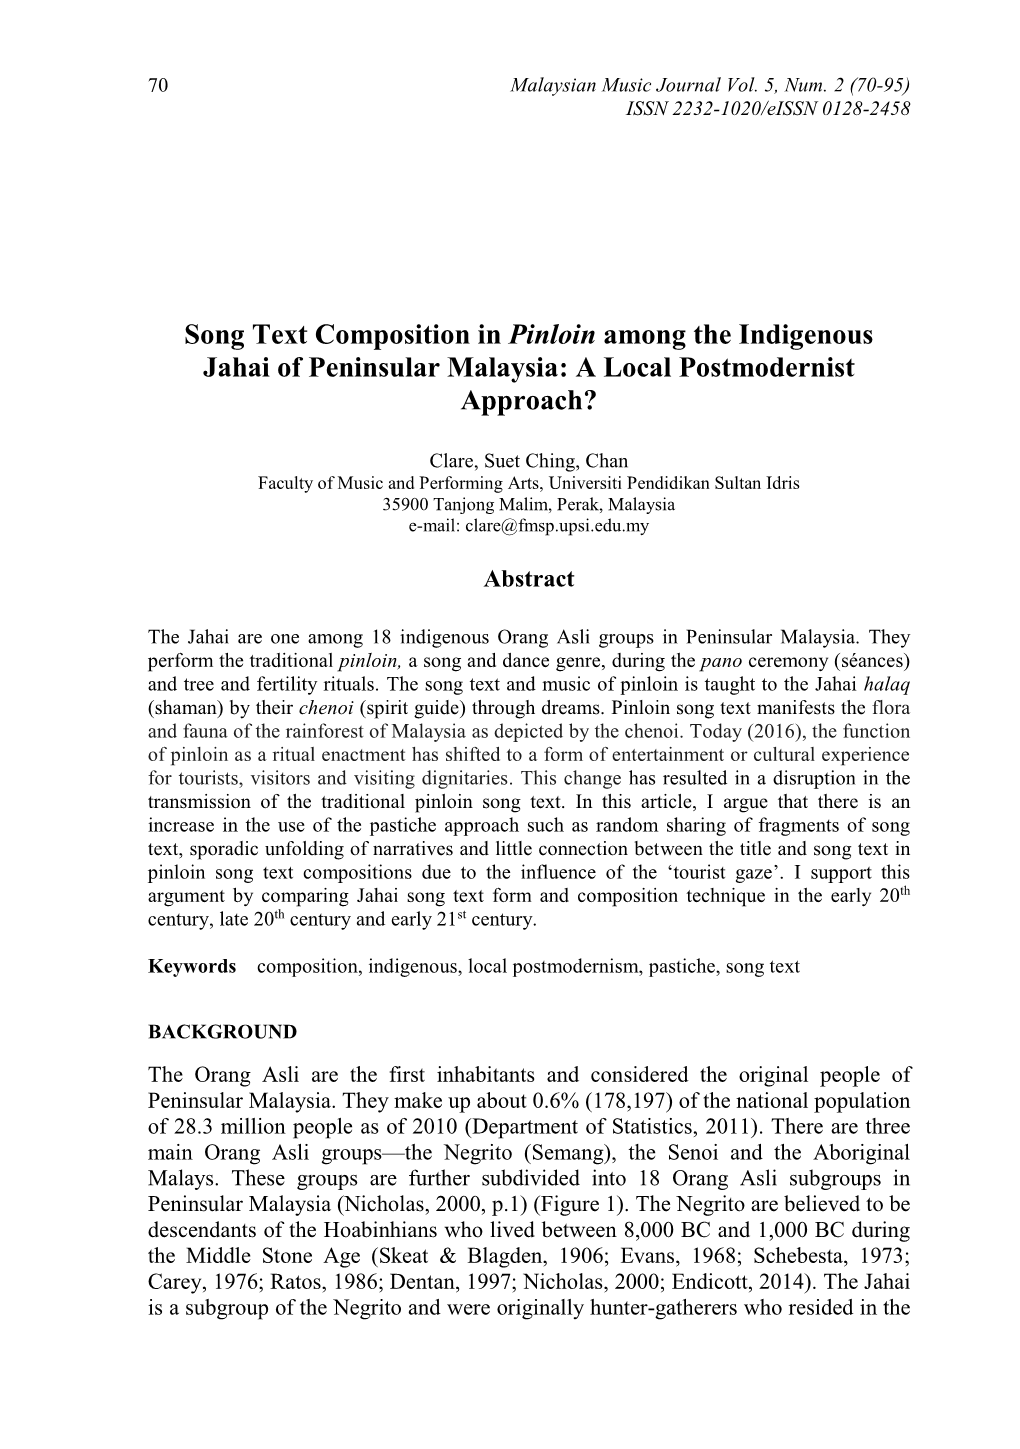 Song Text Composition in Pinloin Among the Indigenous Jahai of Peninsular Malaysia: a Local Postmodernist Approach?